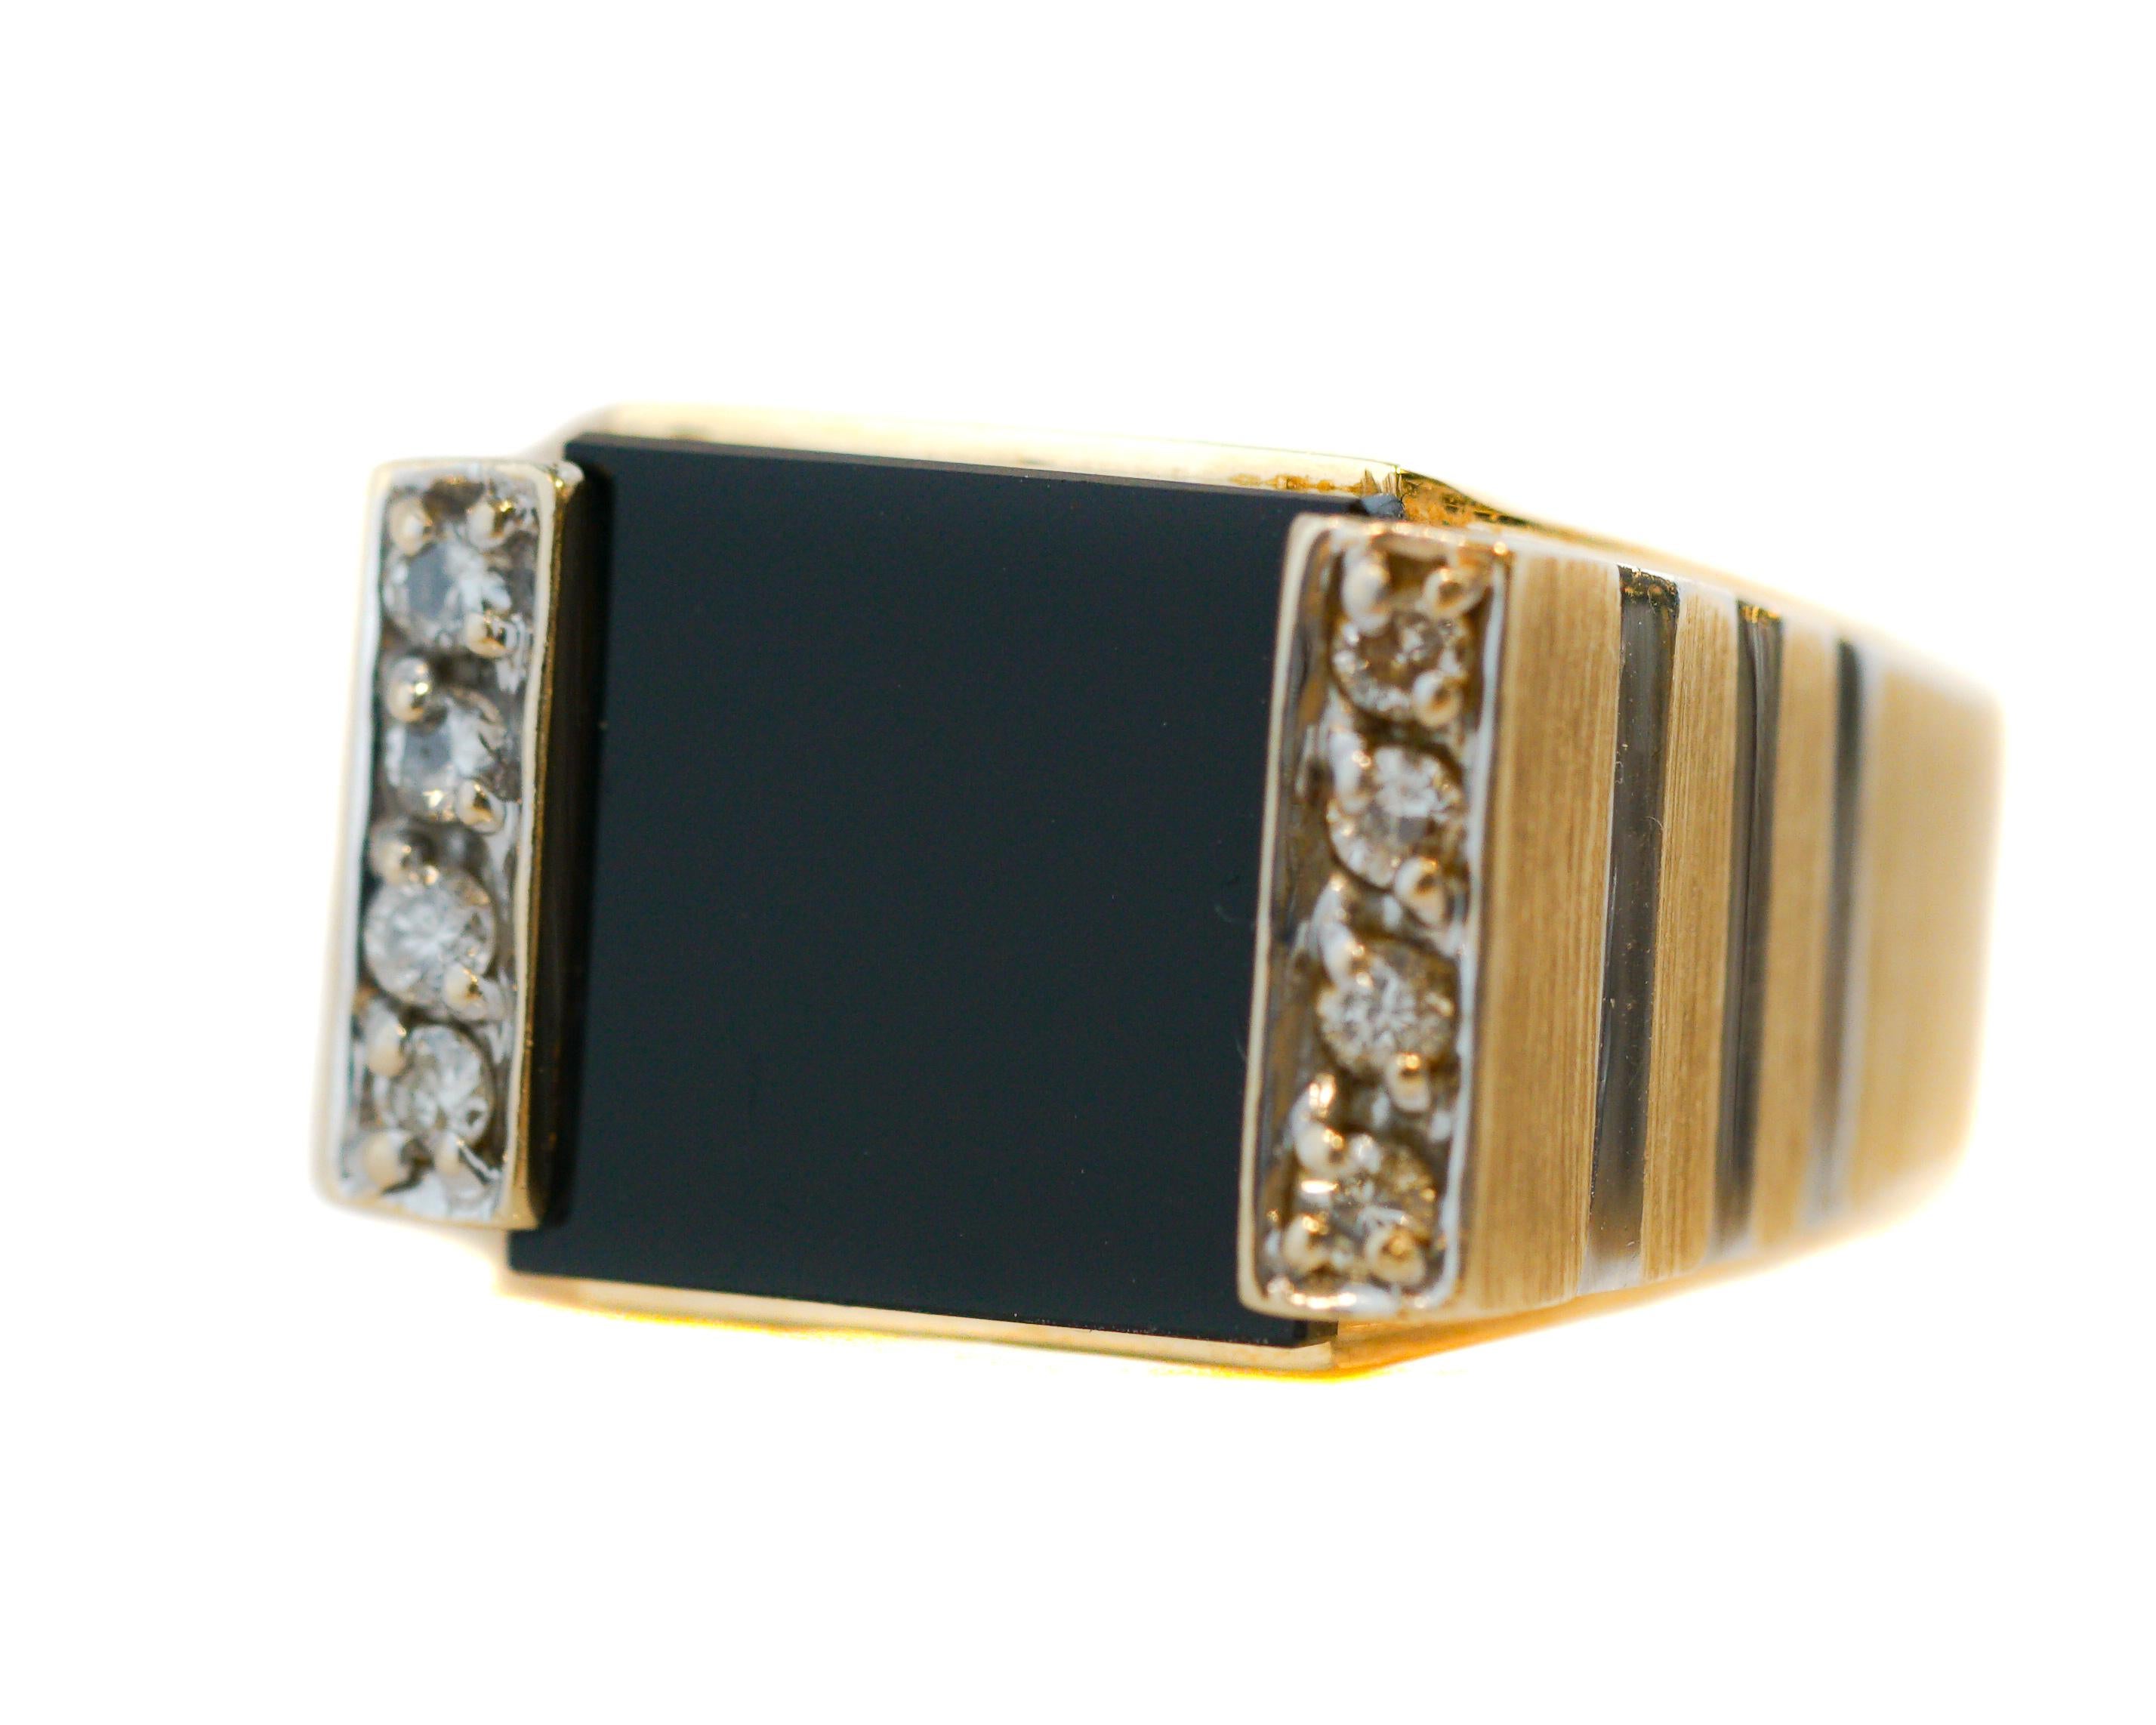 This modern, classically designed 14 karat Yellow Gold Men's Ring has elegant White Gold Accents. 

The strikingly contrasting Black Onyx Center Stone is flanked by 2 Rows of Round Brilliant Diamonds, 8 Diamonds Total weighing 1.2 carats total.